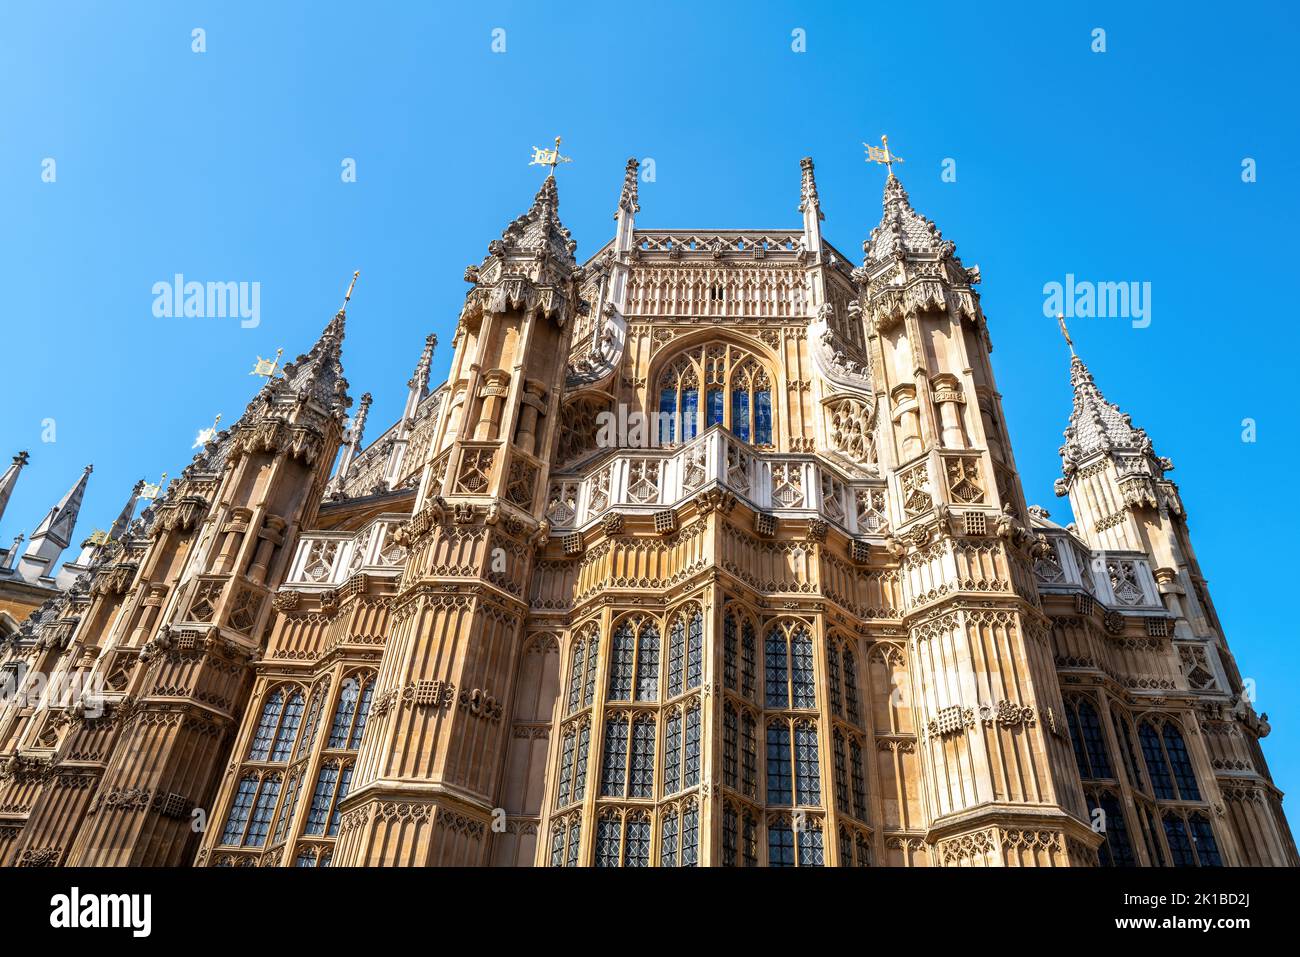 Westminster Abbey, London, famous as the site of many Royal weddings, coronations and burials. Detail of this medieval building against blue sky backg Stock Photo